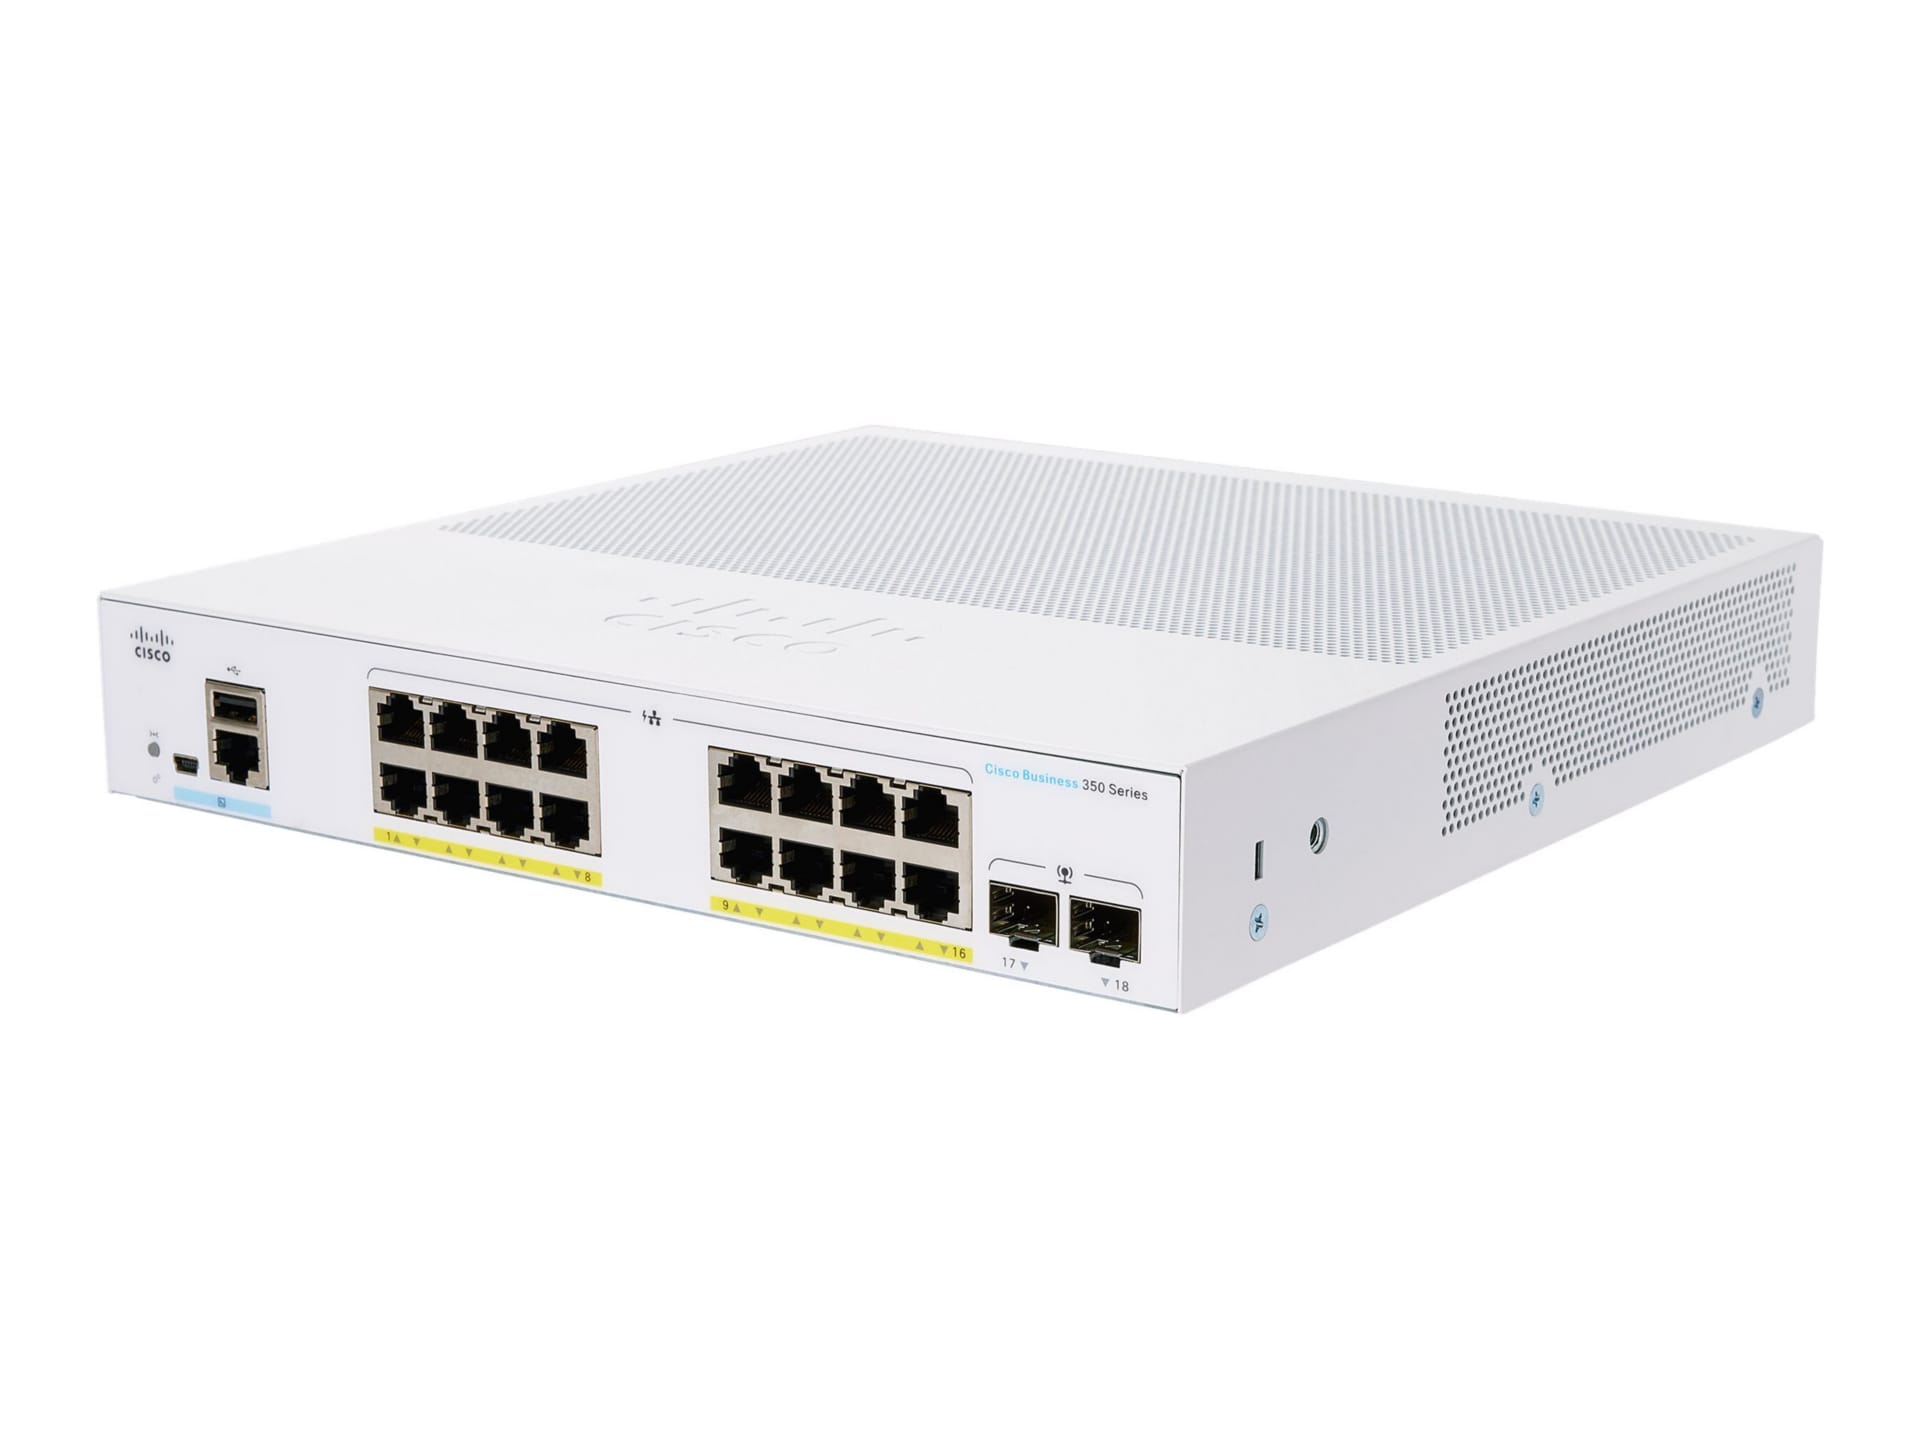 Cisco Business 350 Series CBS350-16P-2G - switch - 16 ports - managed - rack-mountable